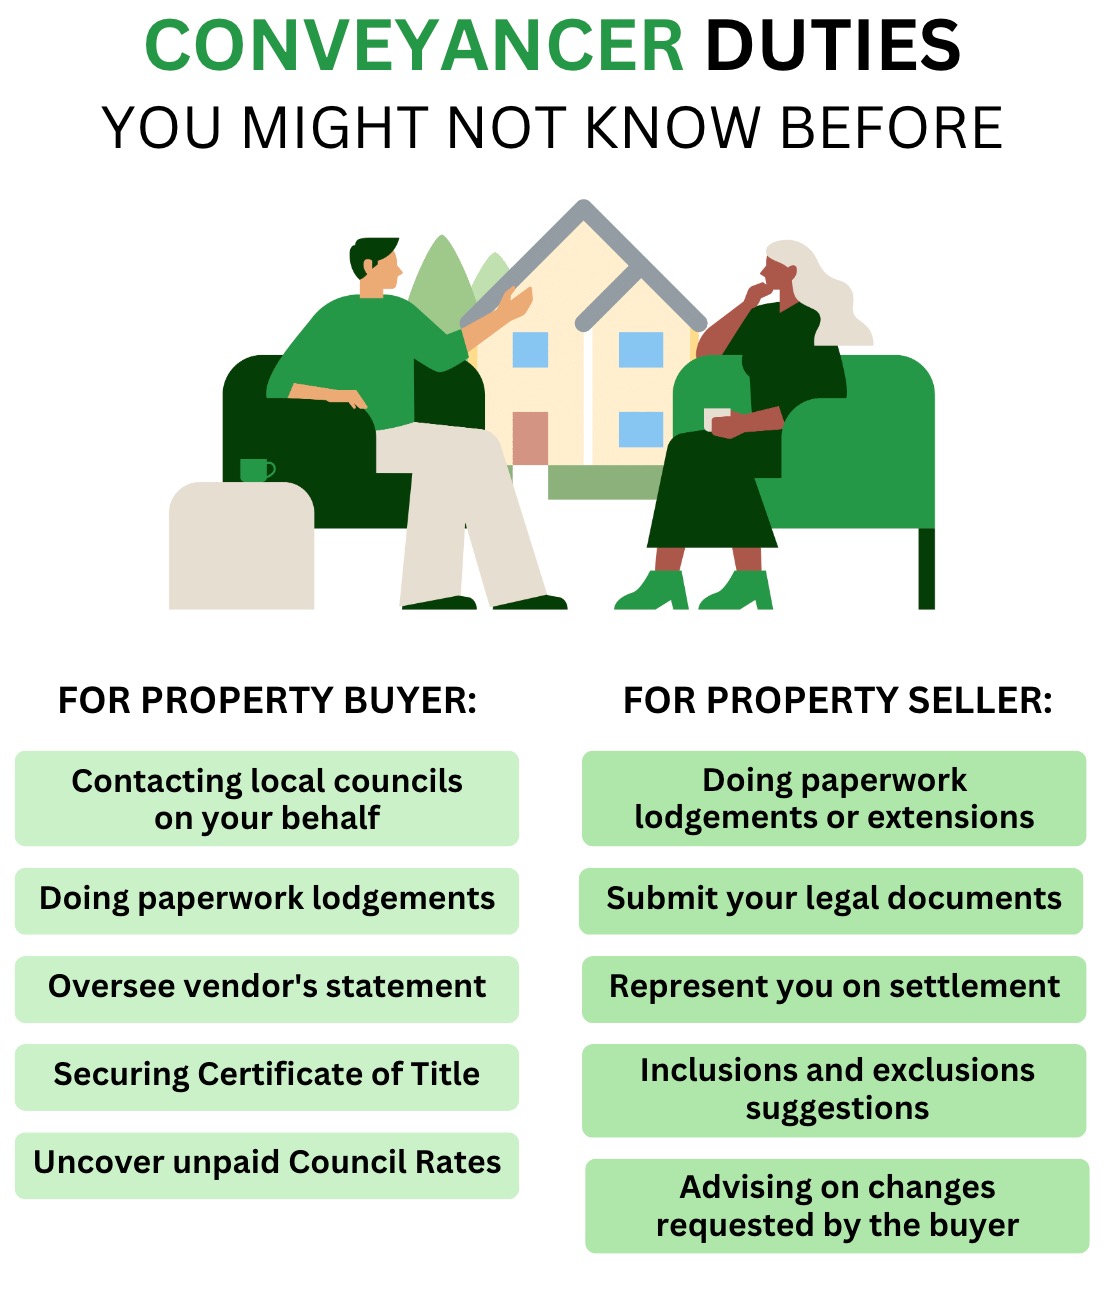 who pays conveyancing fees buyer or seller